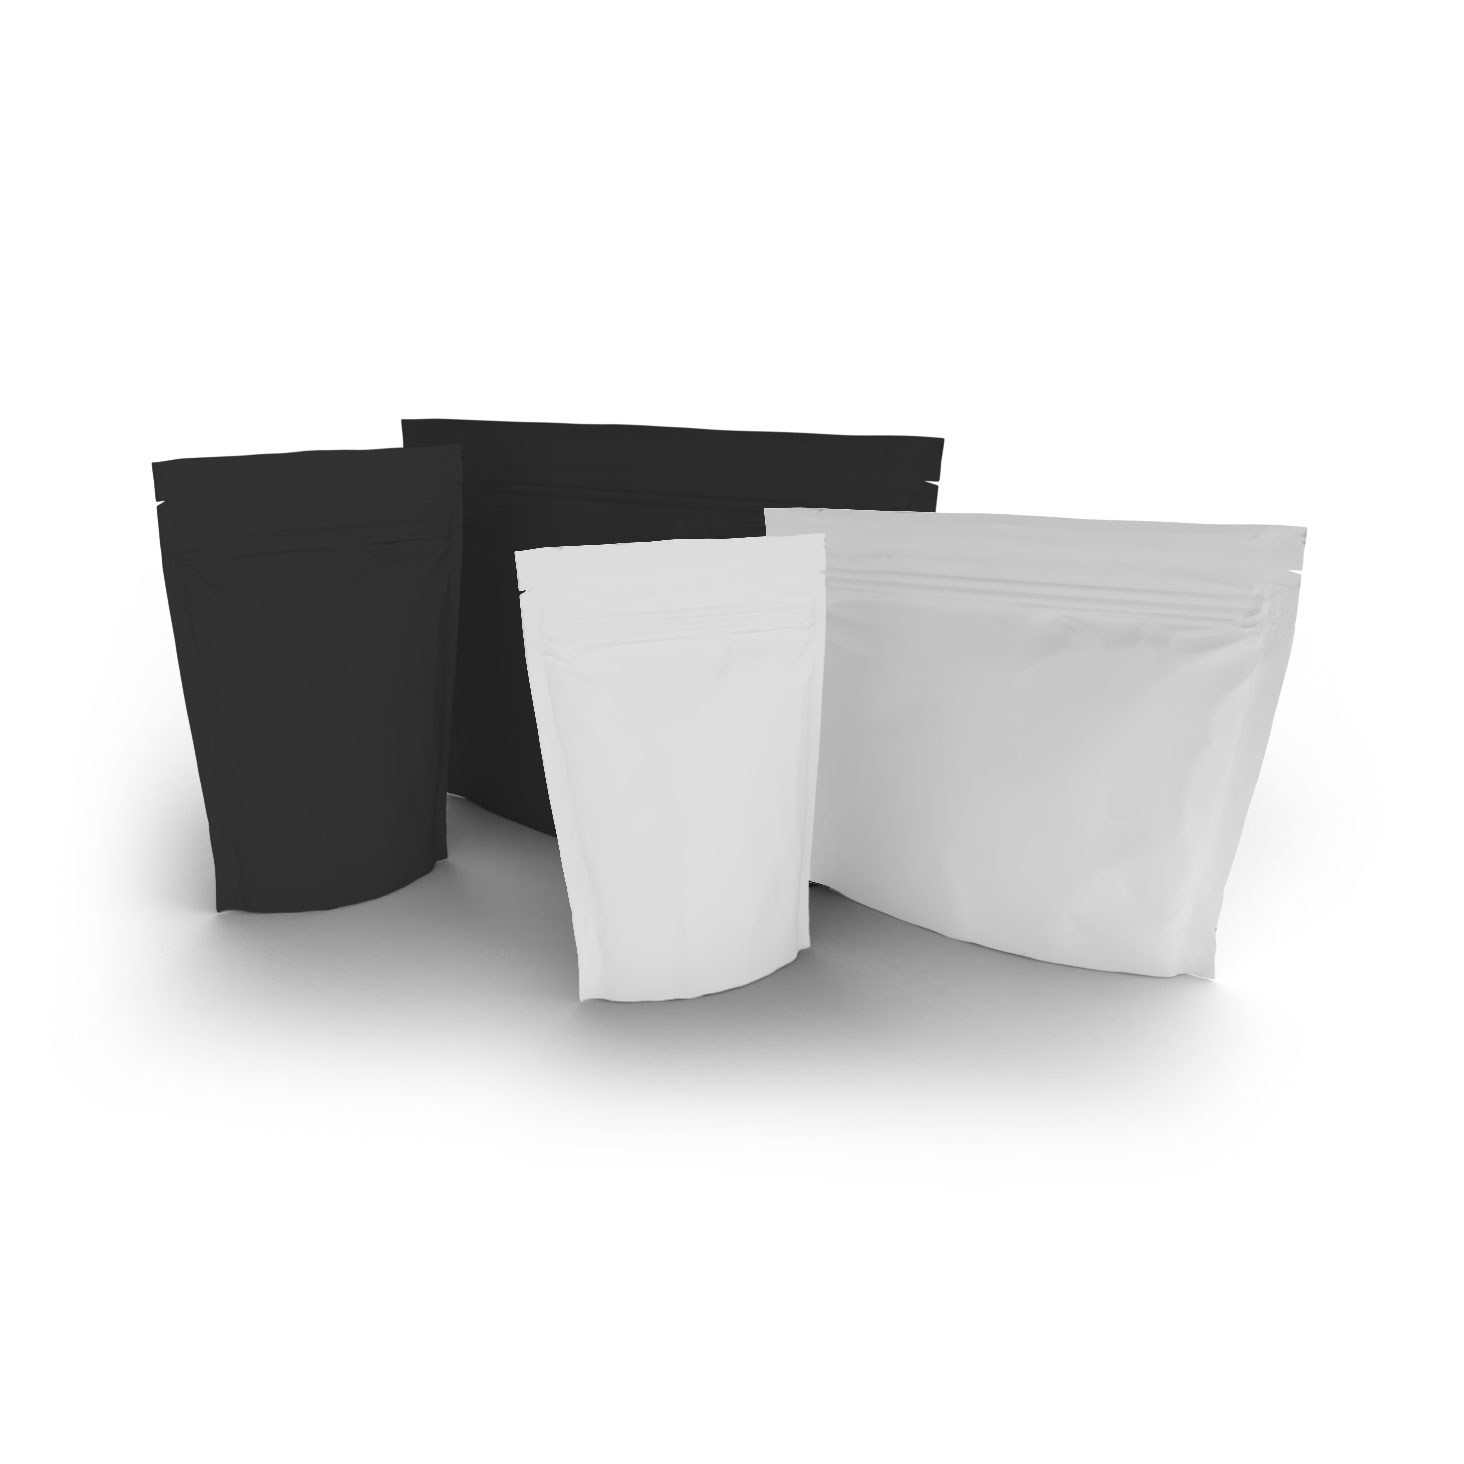 Cannasupplies CR Pouches for dried flower, edibles and more. In-stock in 3 sizes in black or white, or contact us to learn more about custom printing.